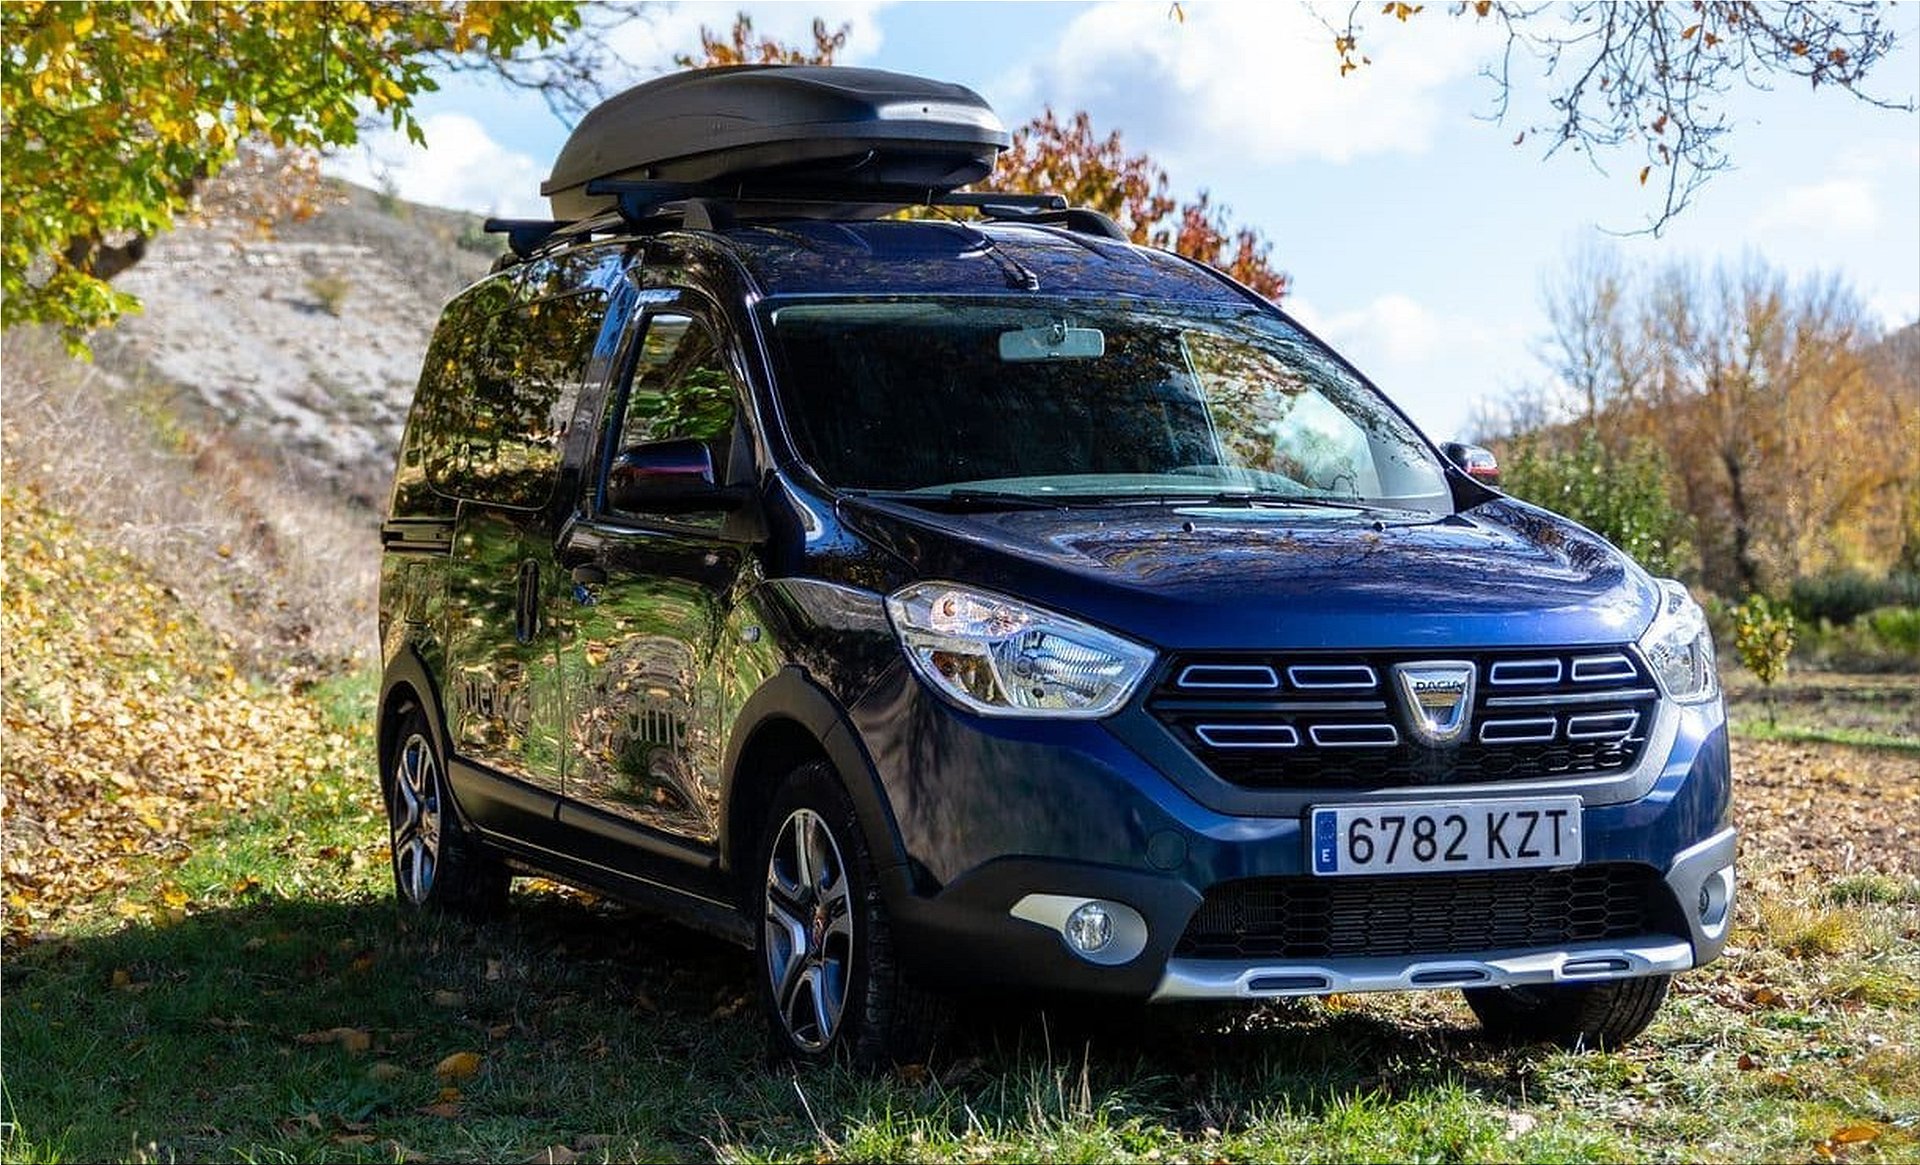 Dacia Jogger By Camperiz Is A Tiny RV With Lots Of Features